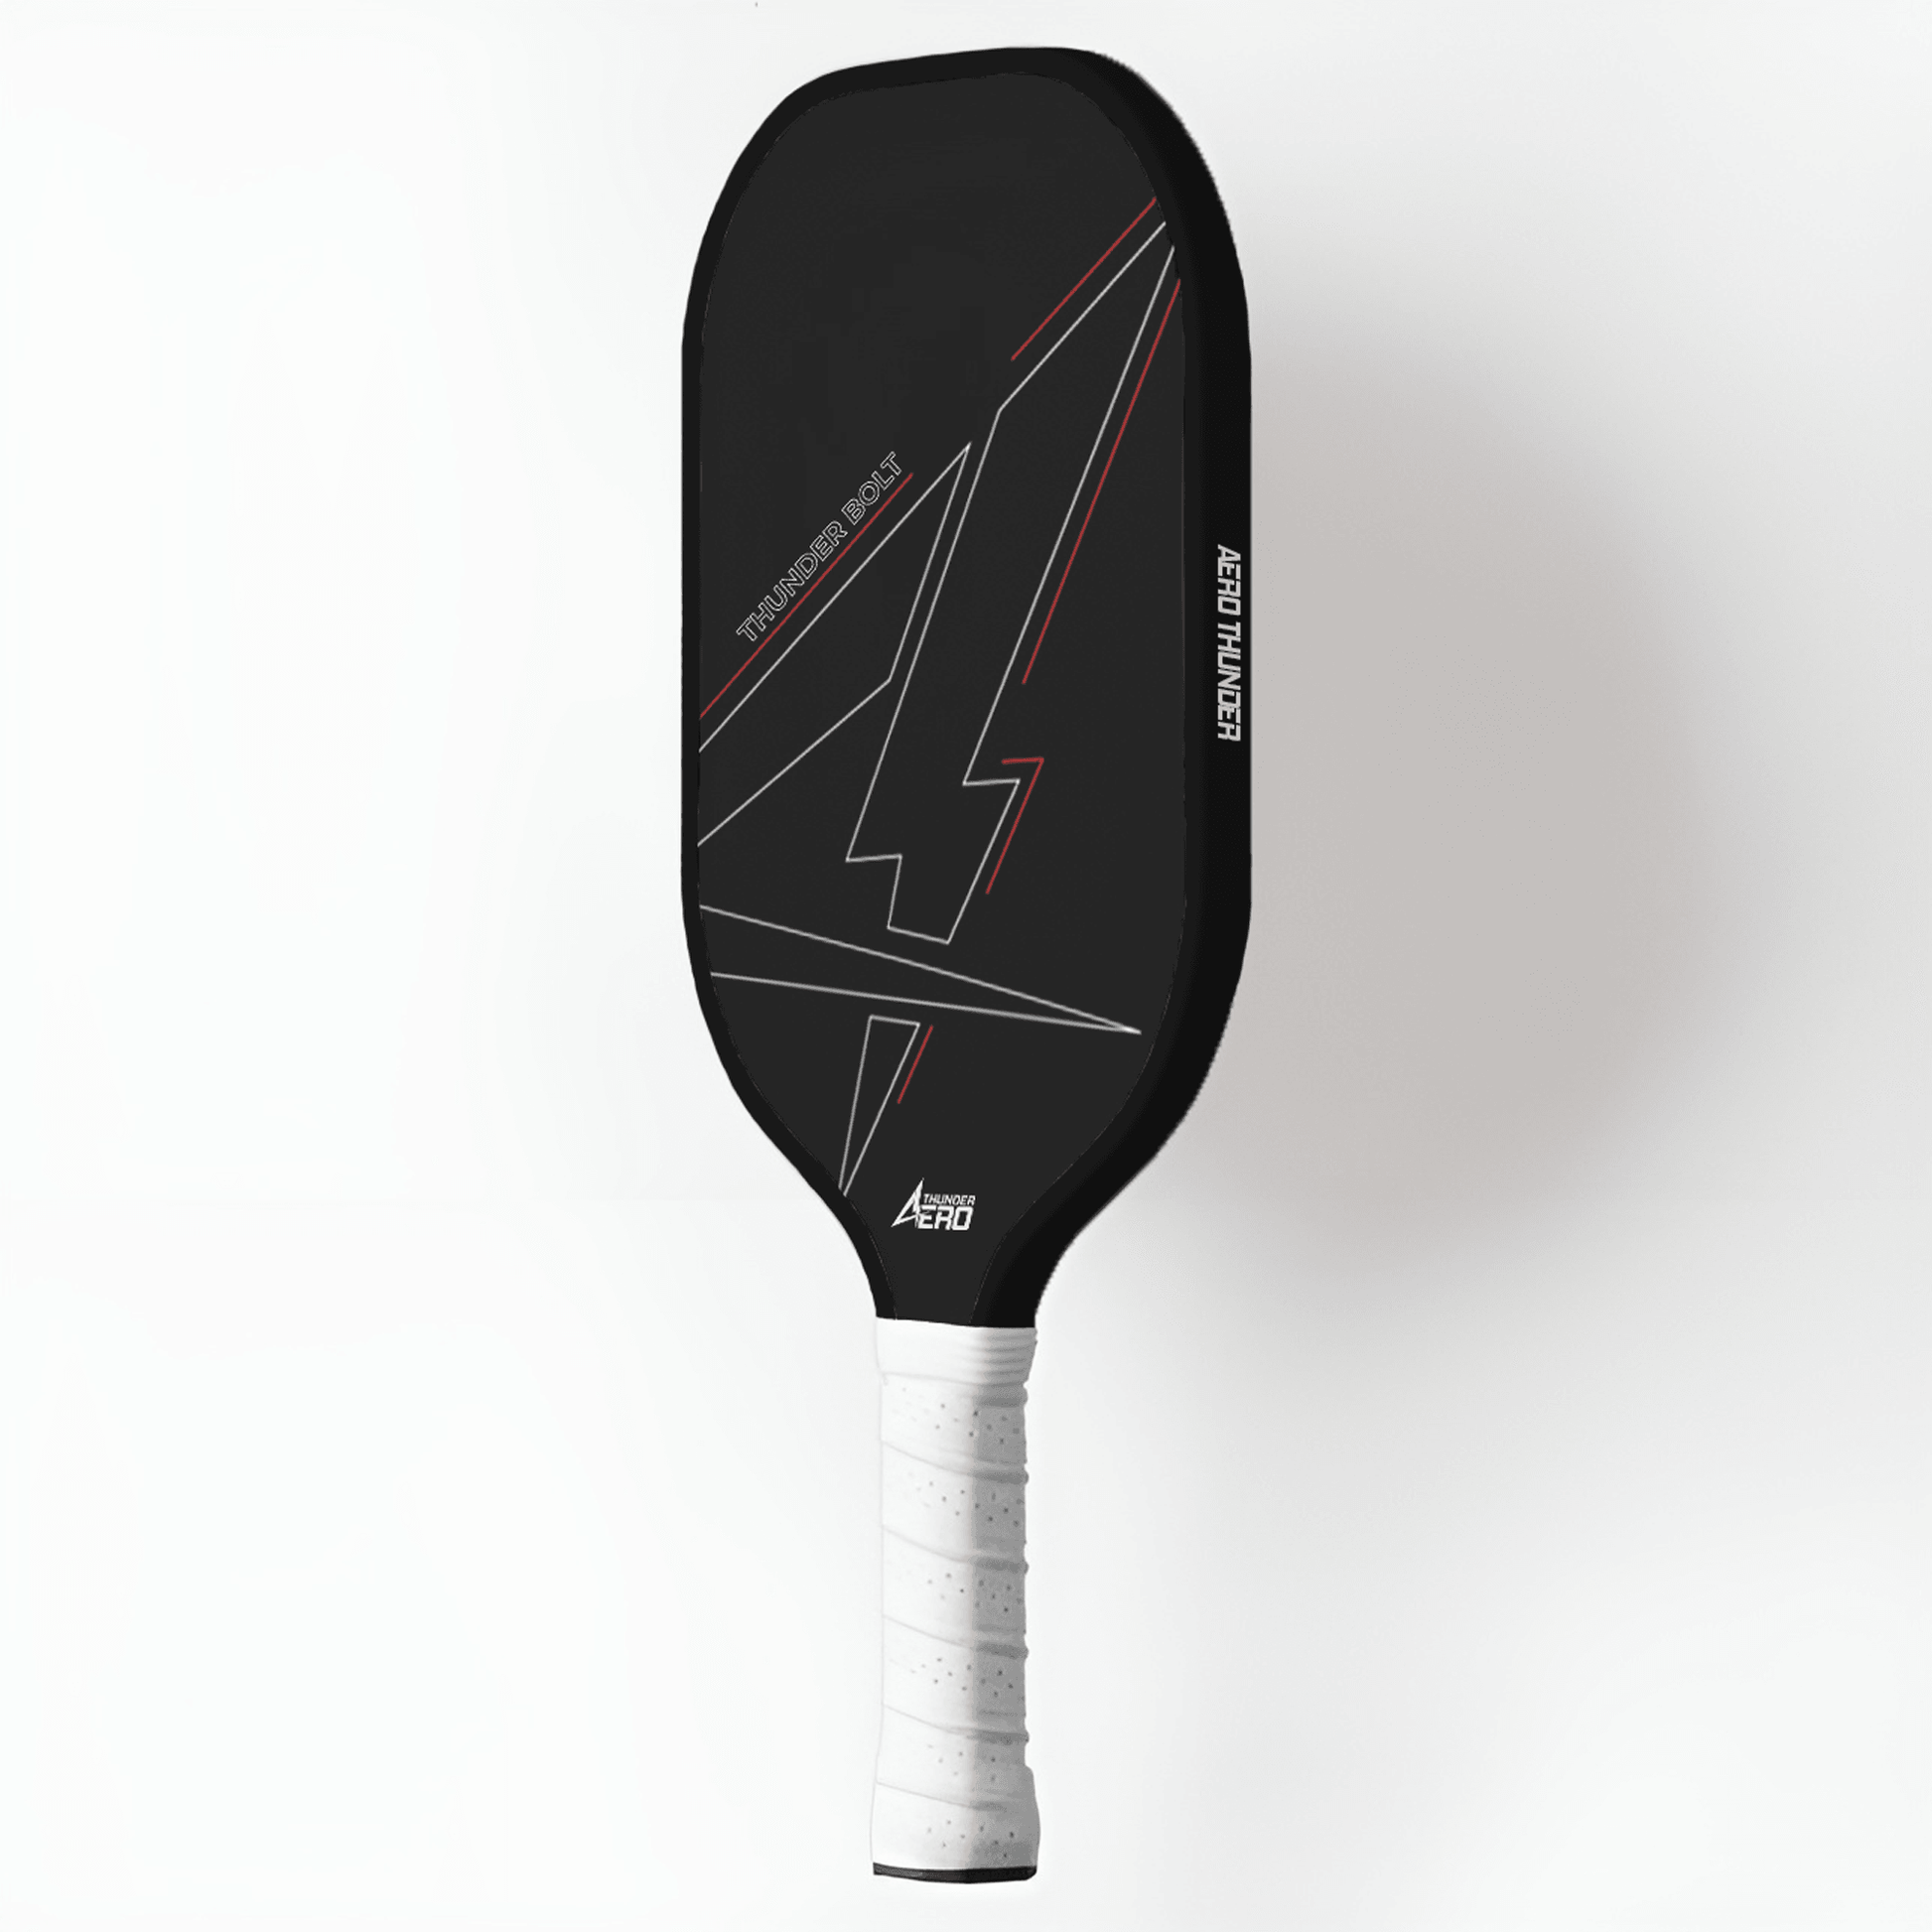 Epic drive Edition Best Professional Pickleball Paddle Brand AT-2001 Red - Aero Thunder